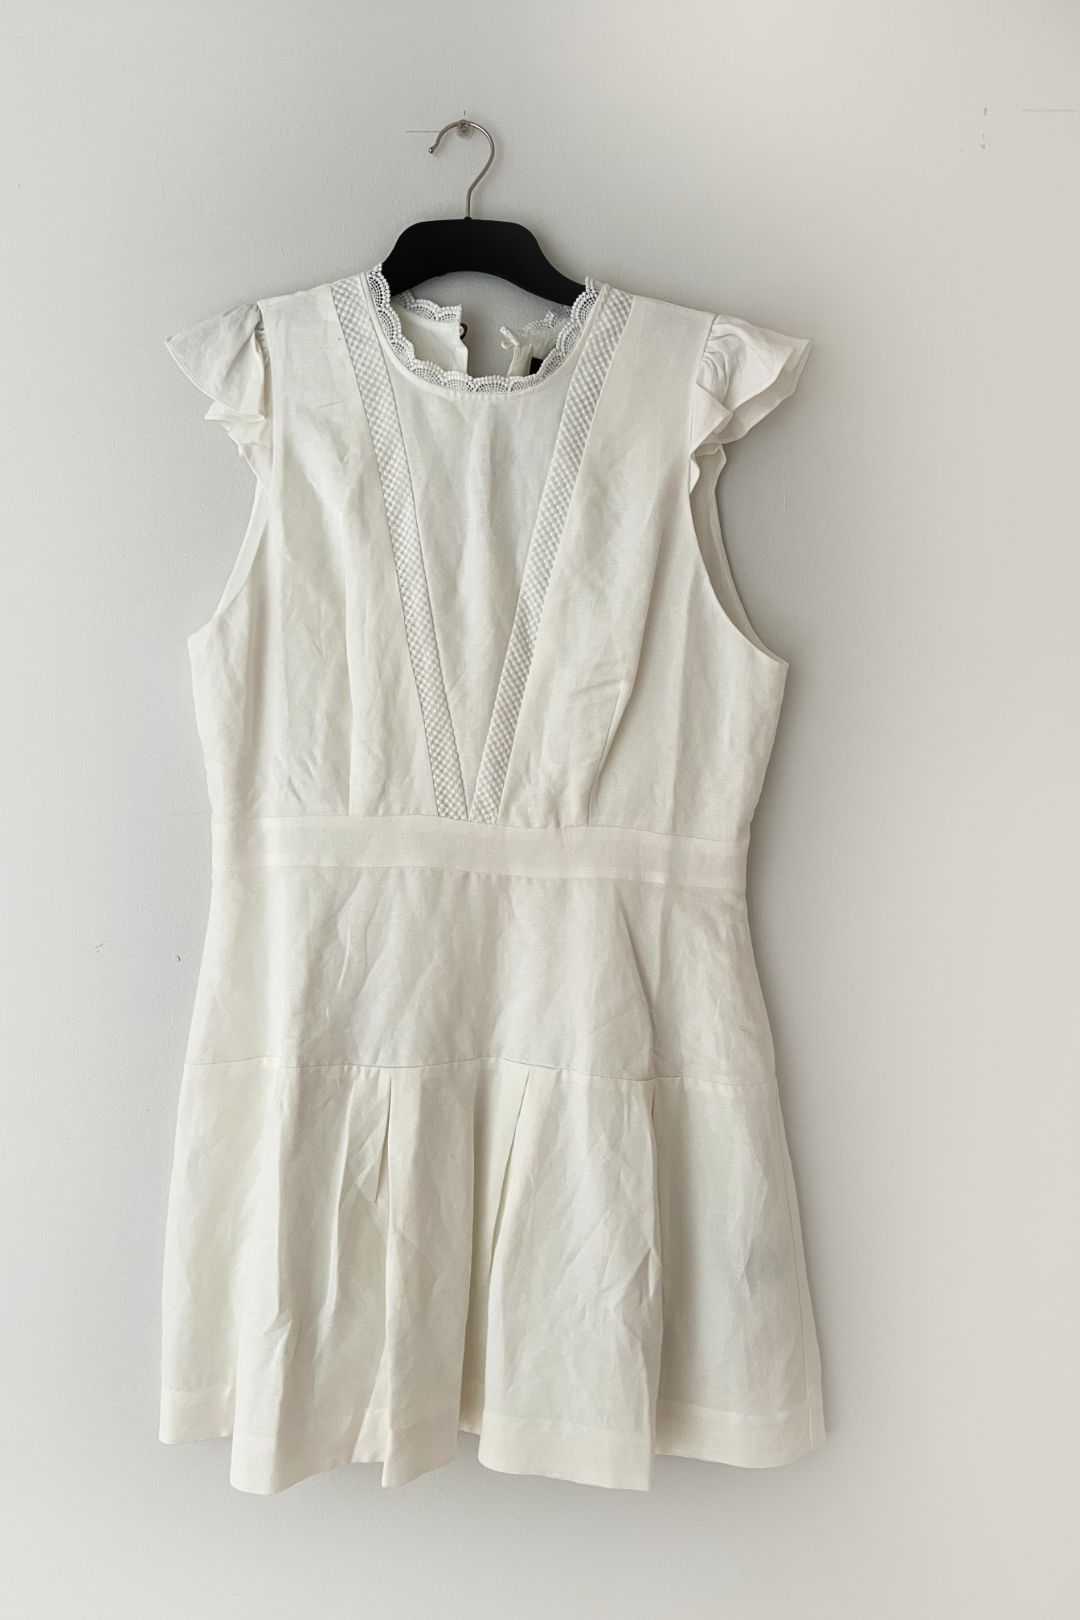 Oxford Morris Lace Insert Dress in White